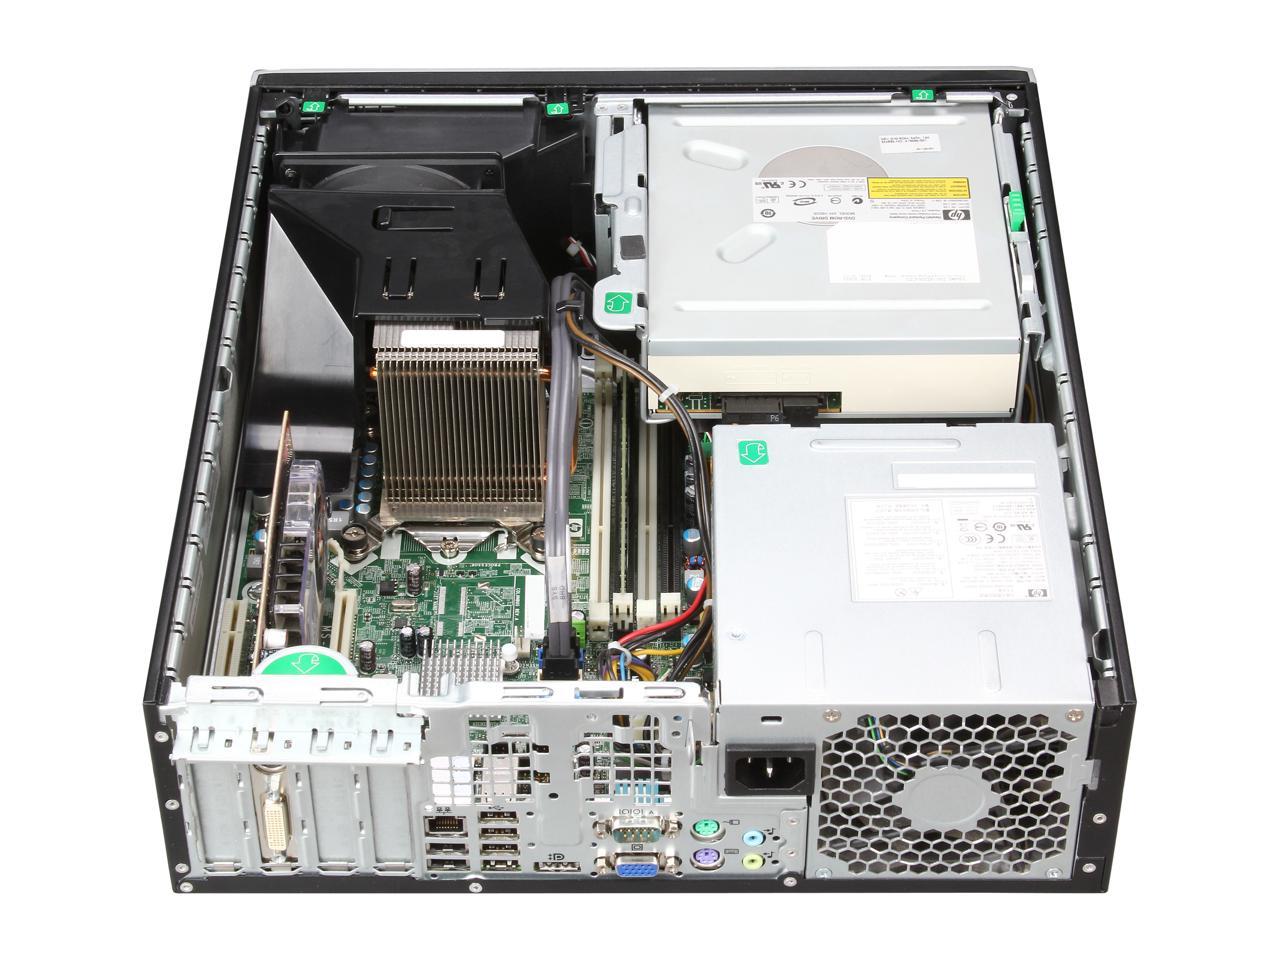 Refurbished Hp 8100 Elite Microsoft Authorized Recertified Small Form Factor Desktop Pc With 5763